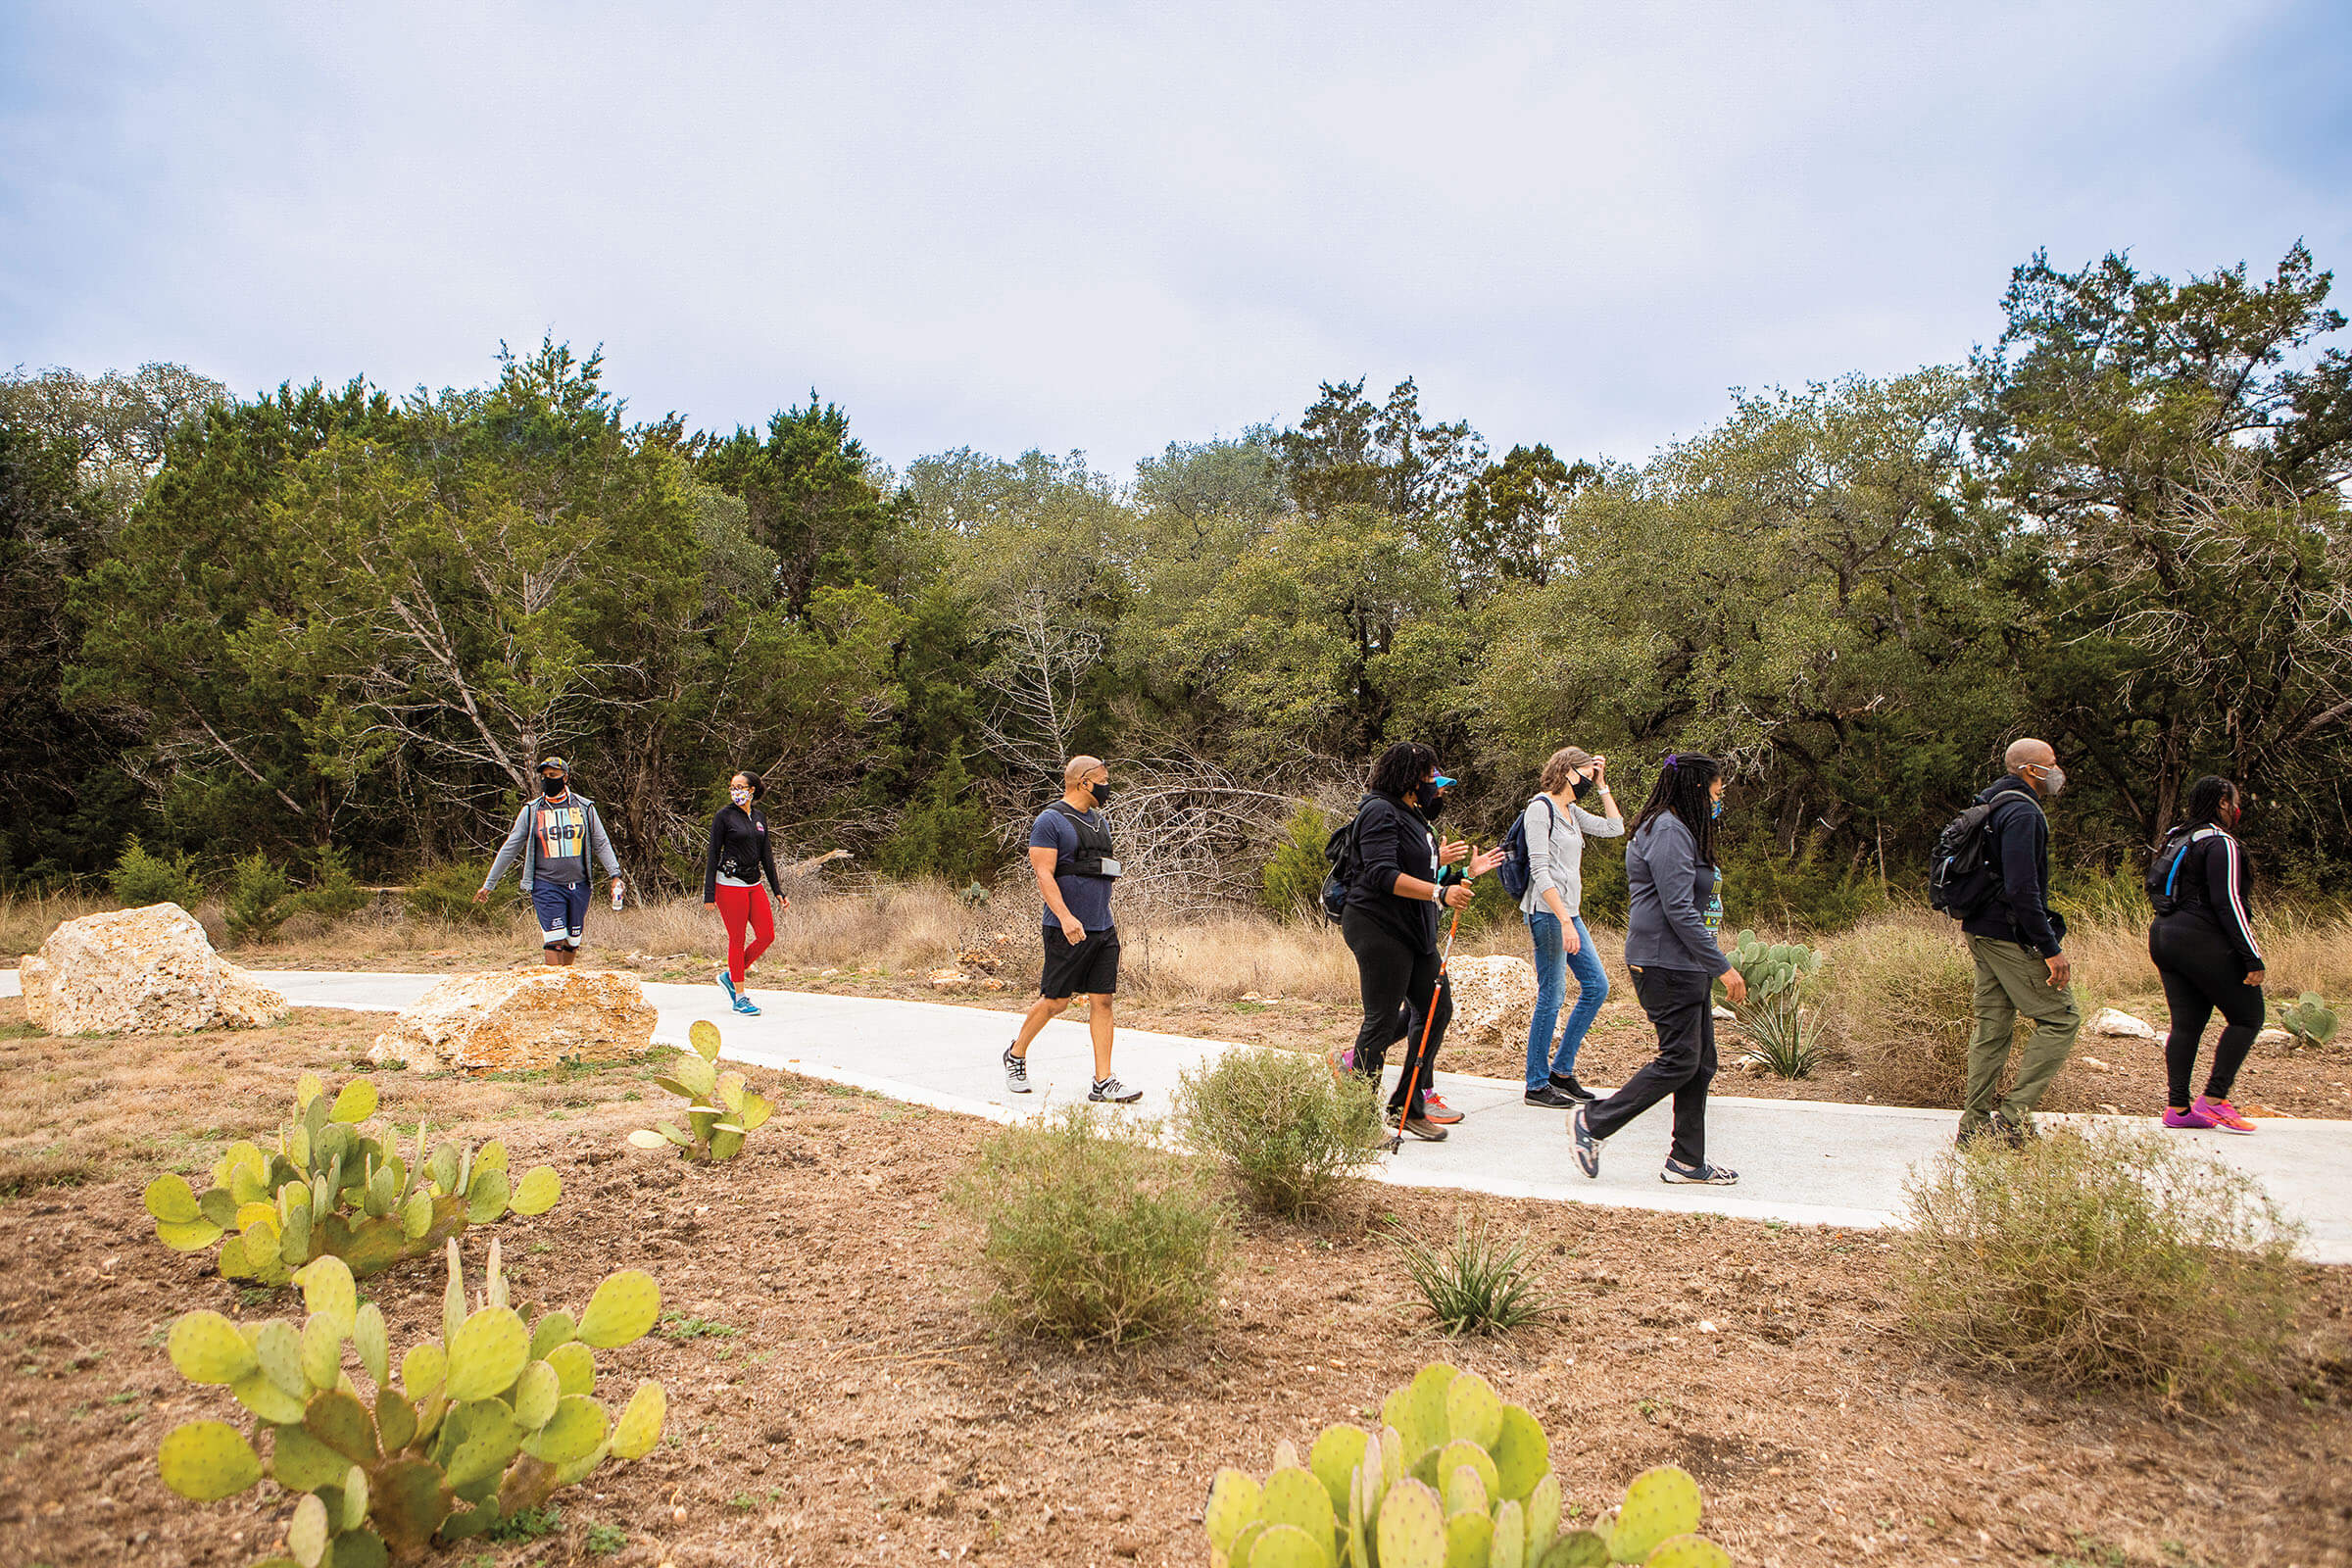 A group of people hike on a concrete trail among short brown brush and taller green trees